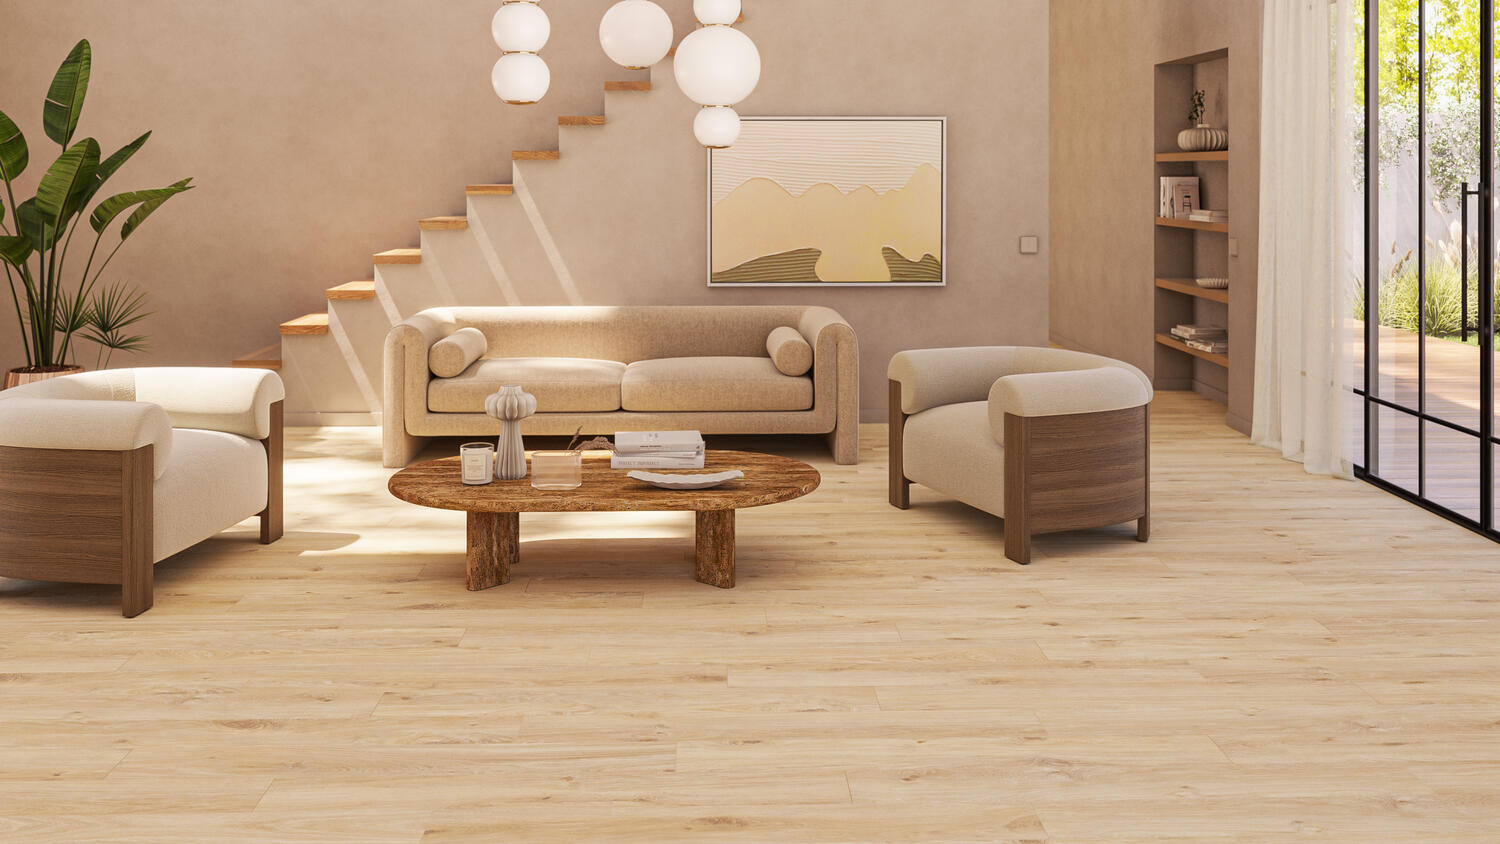 Read our comprehensive guide and follow these easy steps to lay laminate floors quickly and easily.